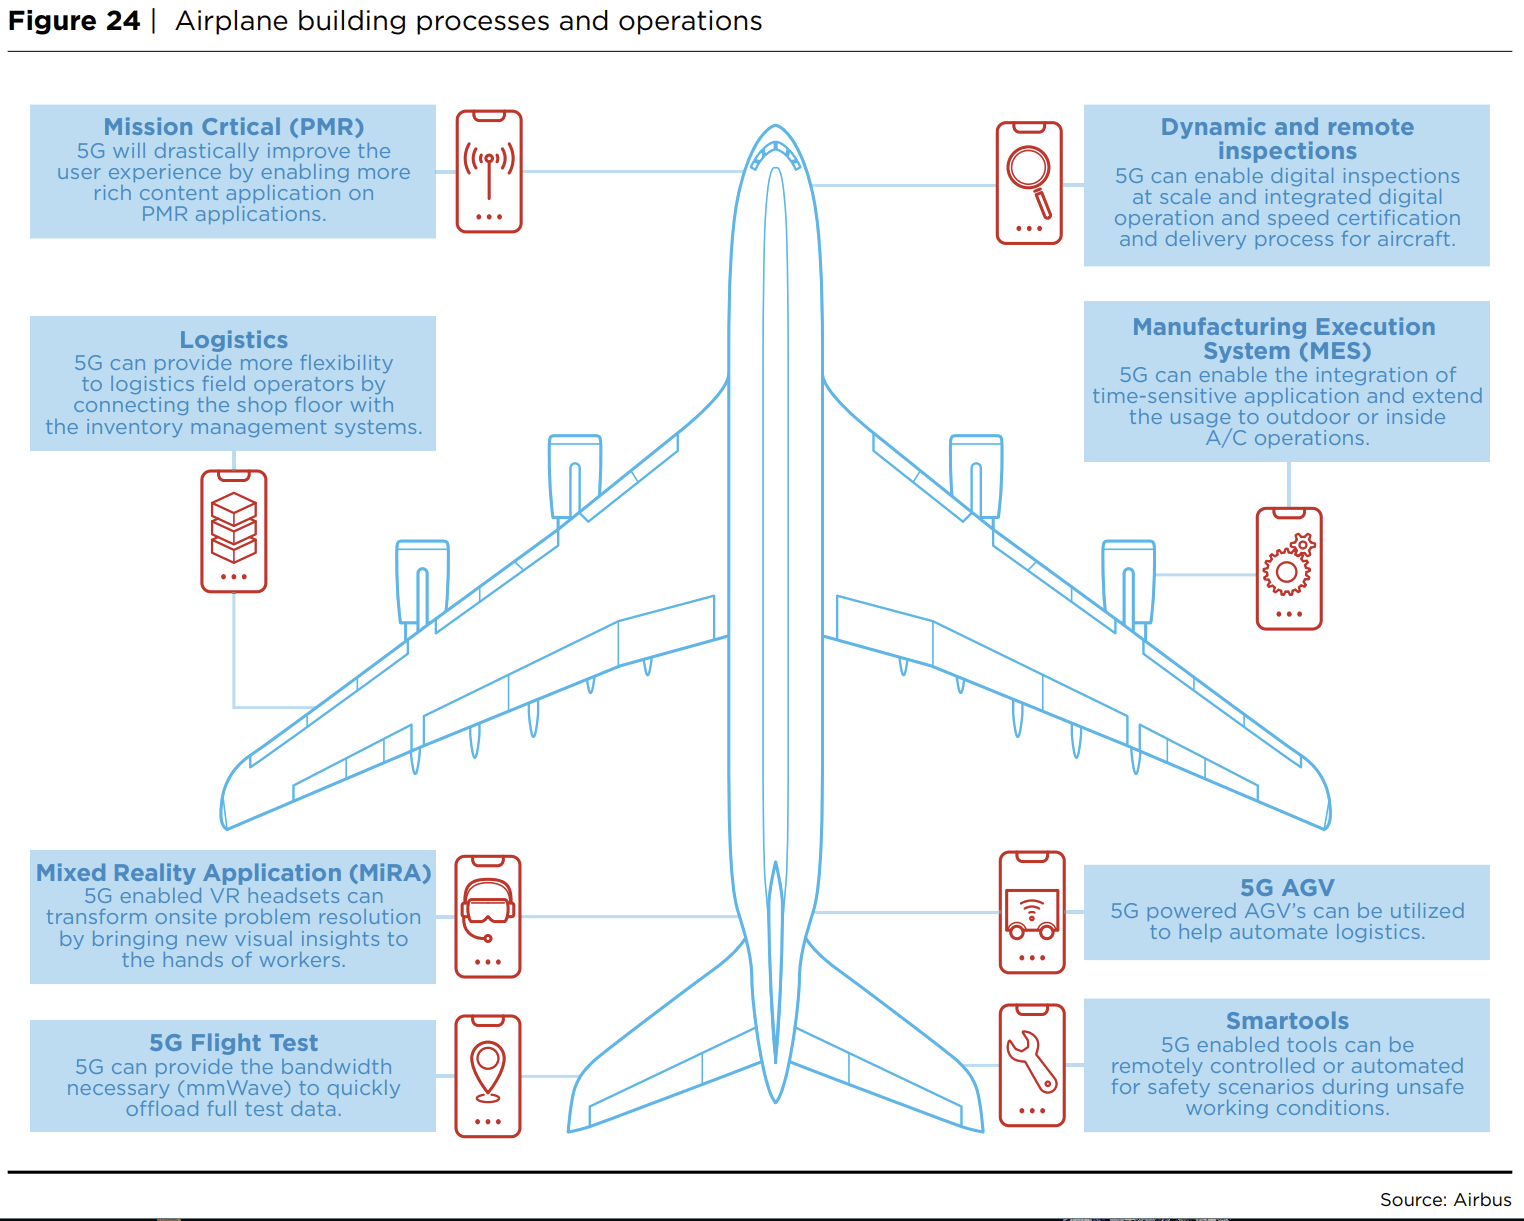 Airbus sees 8 main use cases for private 5G.